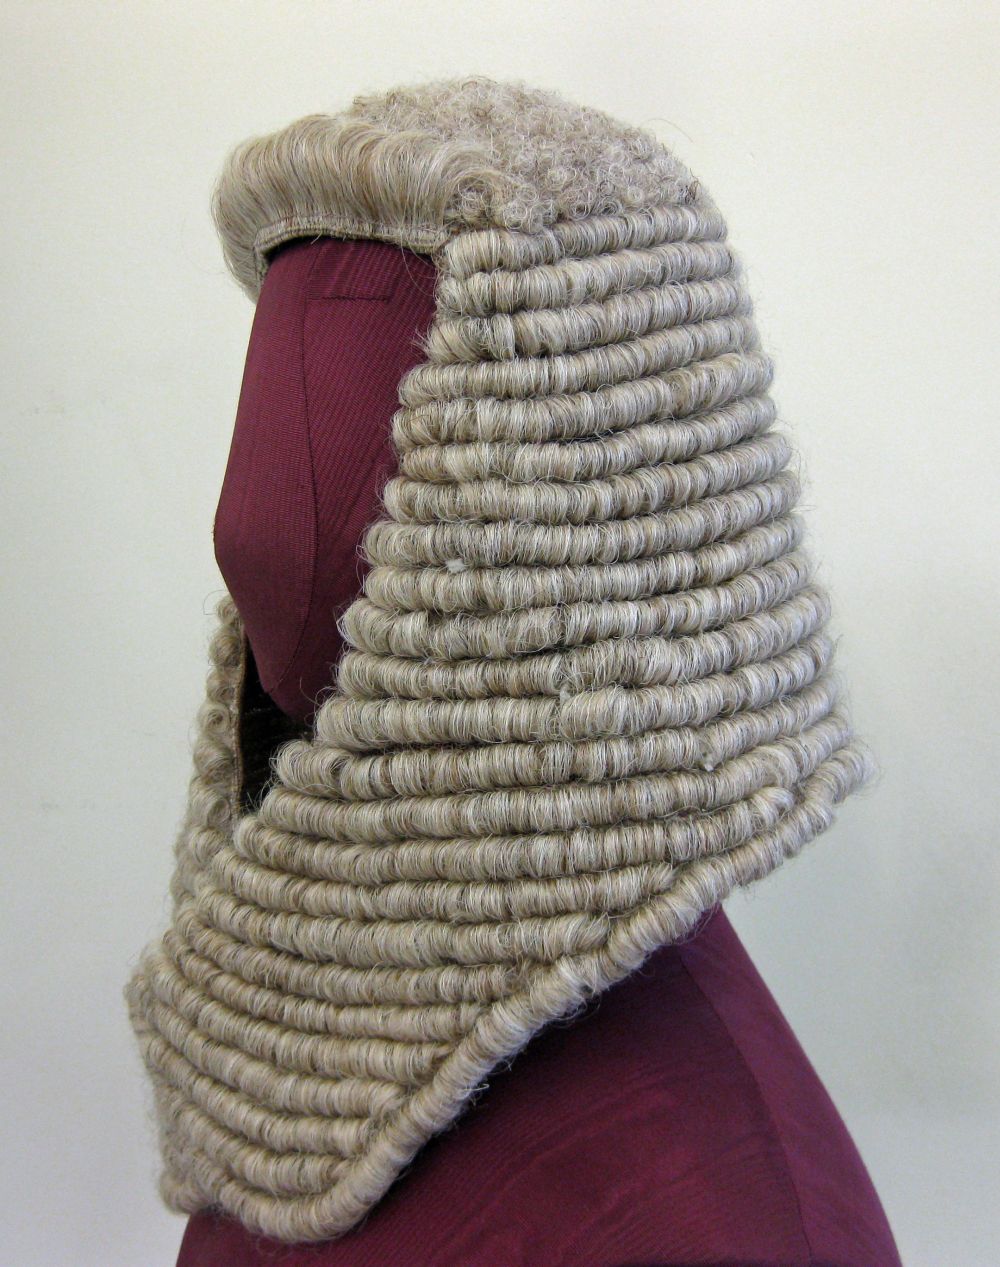 730 Lawyers Wig Stock Photos Pictures  RoyaltyFree Images  iStock   Justice Lawyers wig Gavel